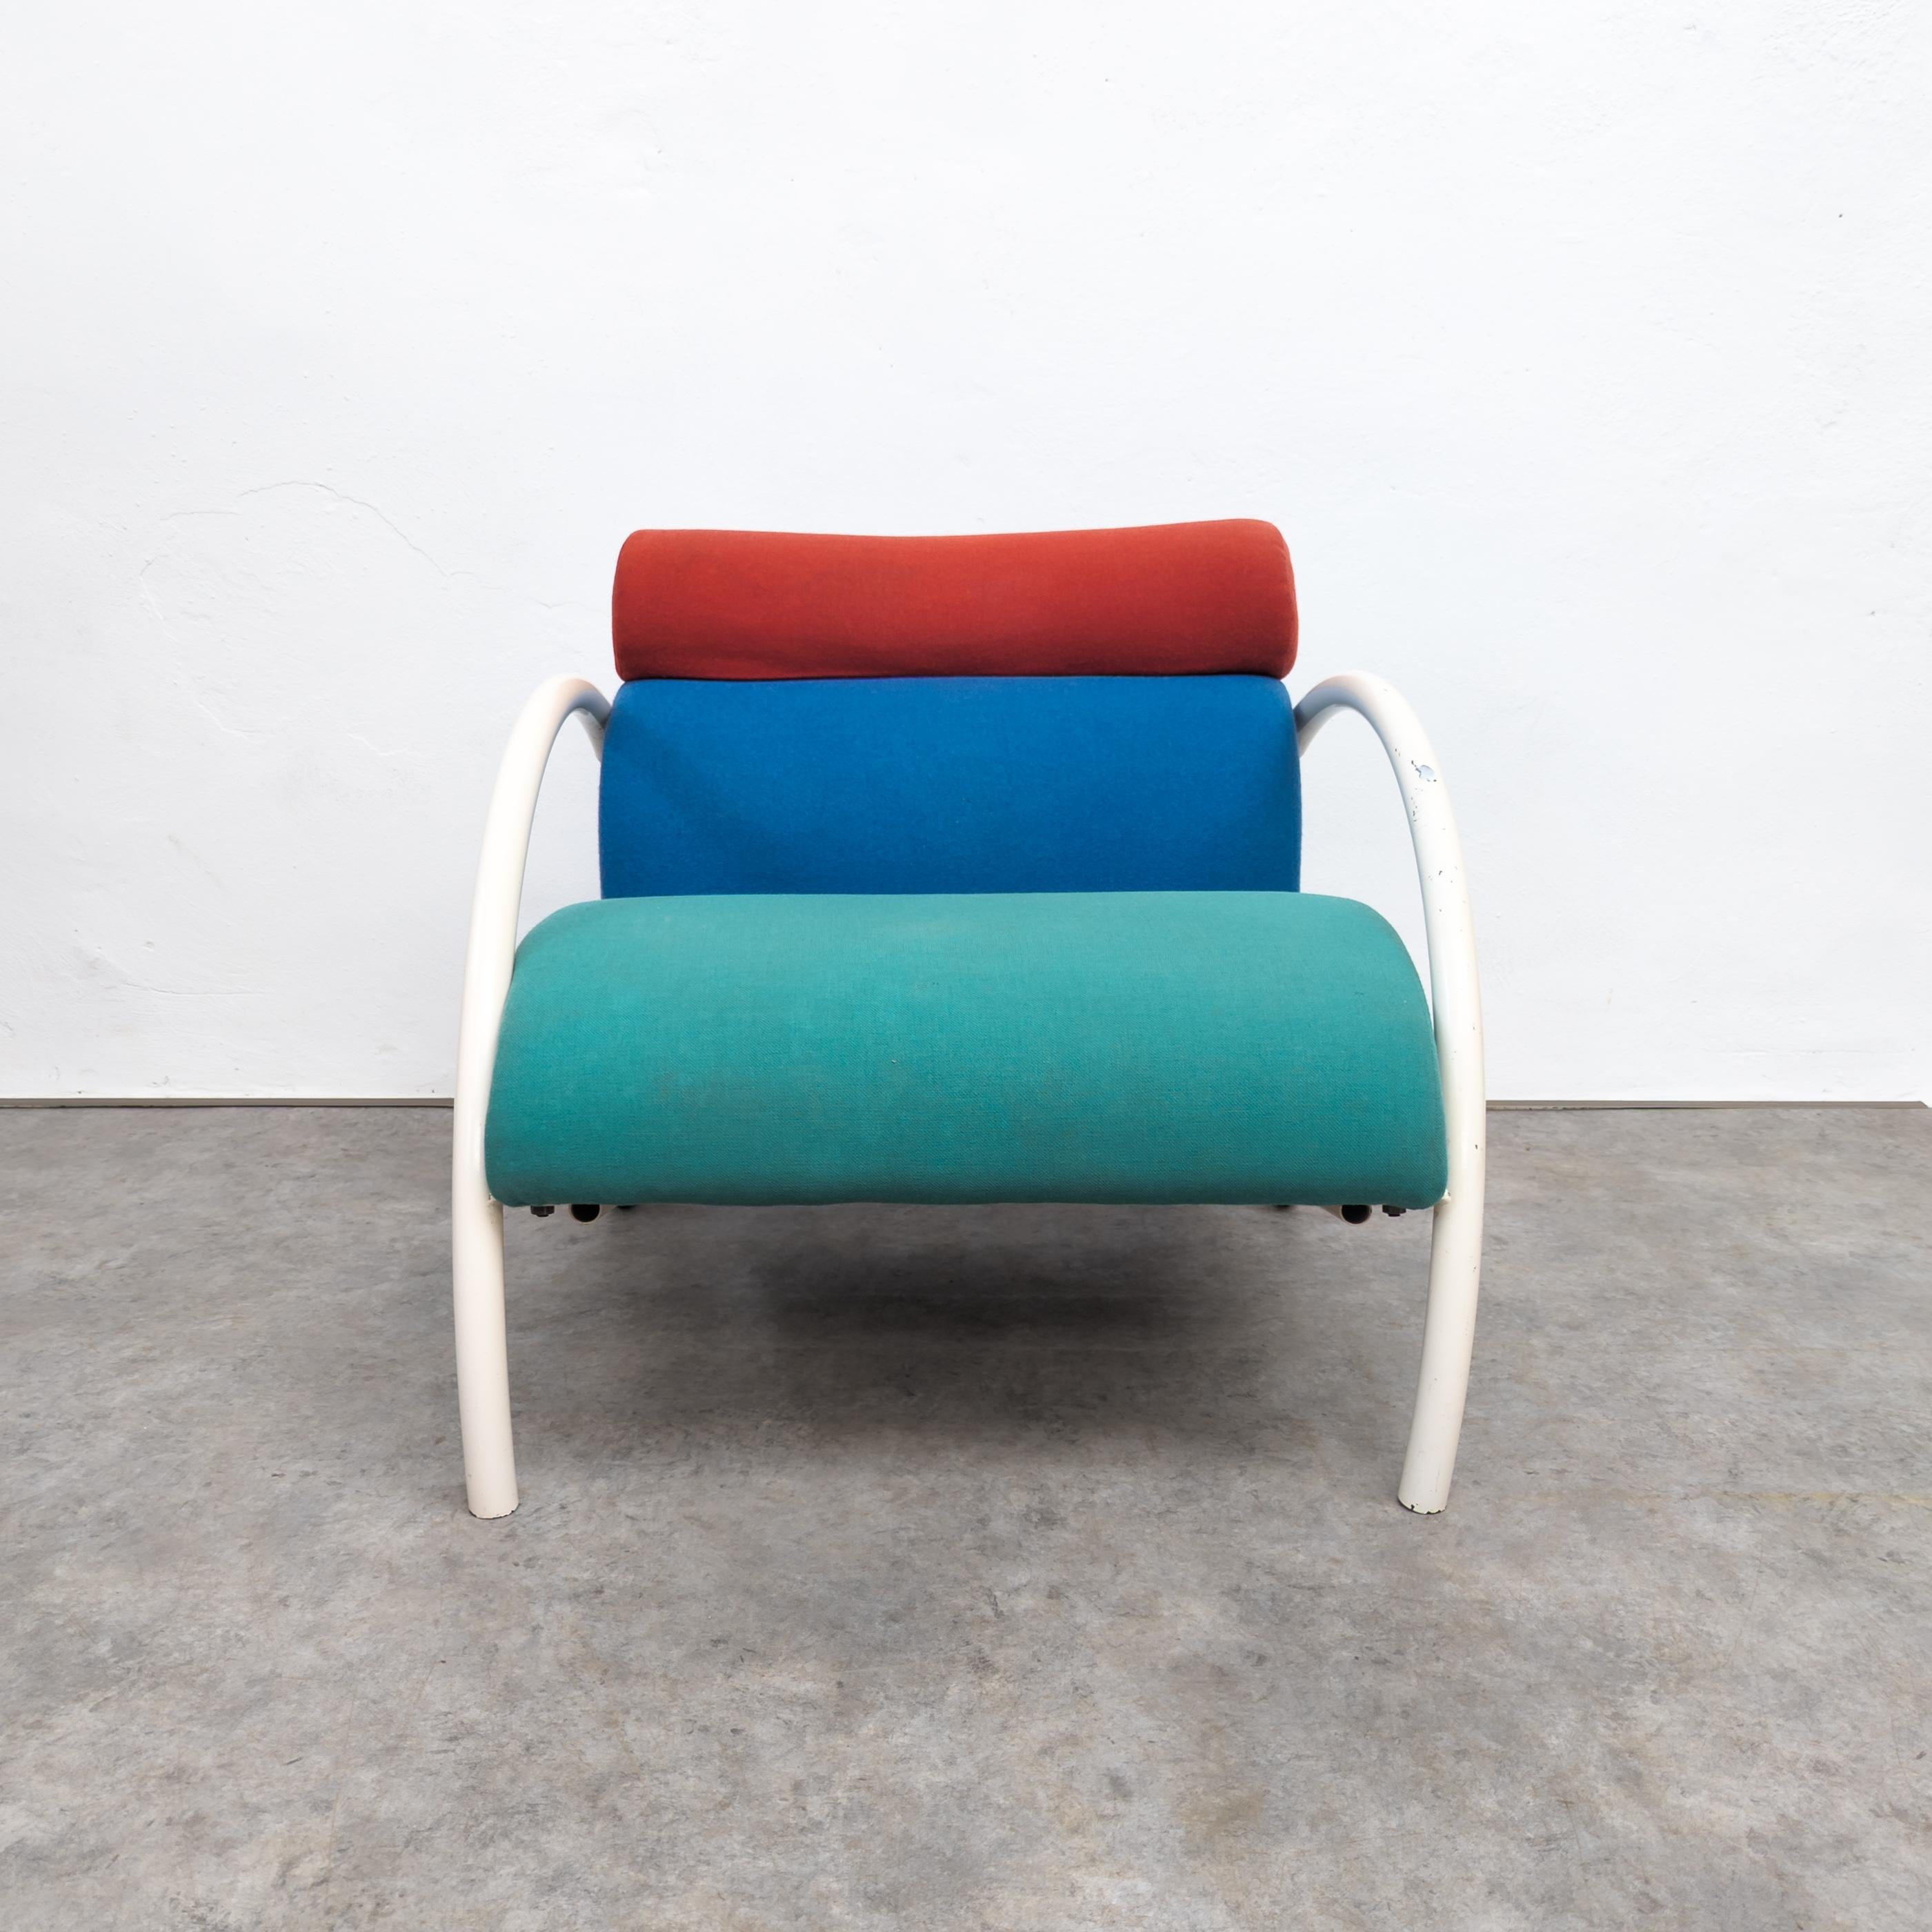 Steel Postmodern Zyklus armchair by Peter Maly for COR, 1980s For Sale